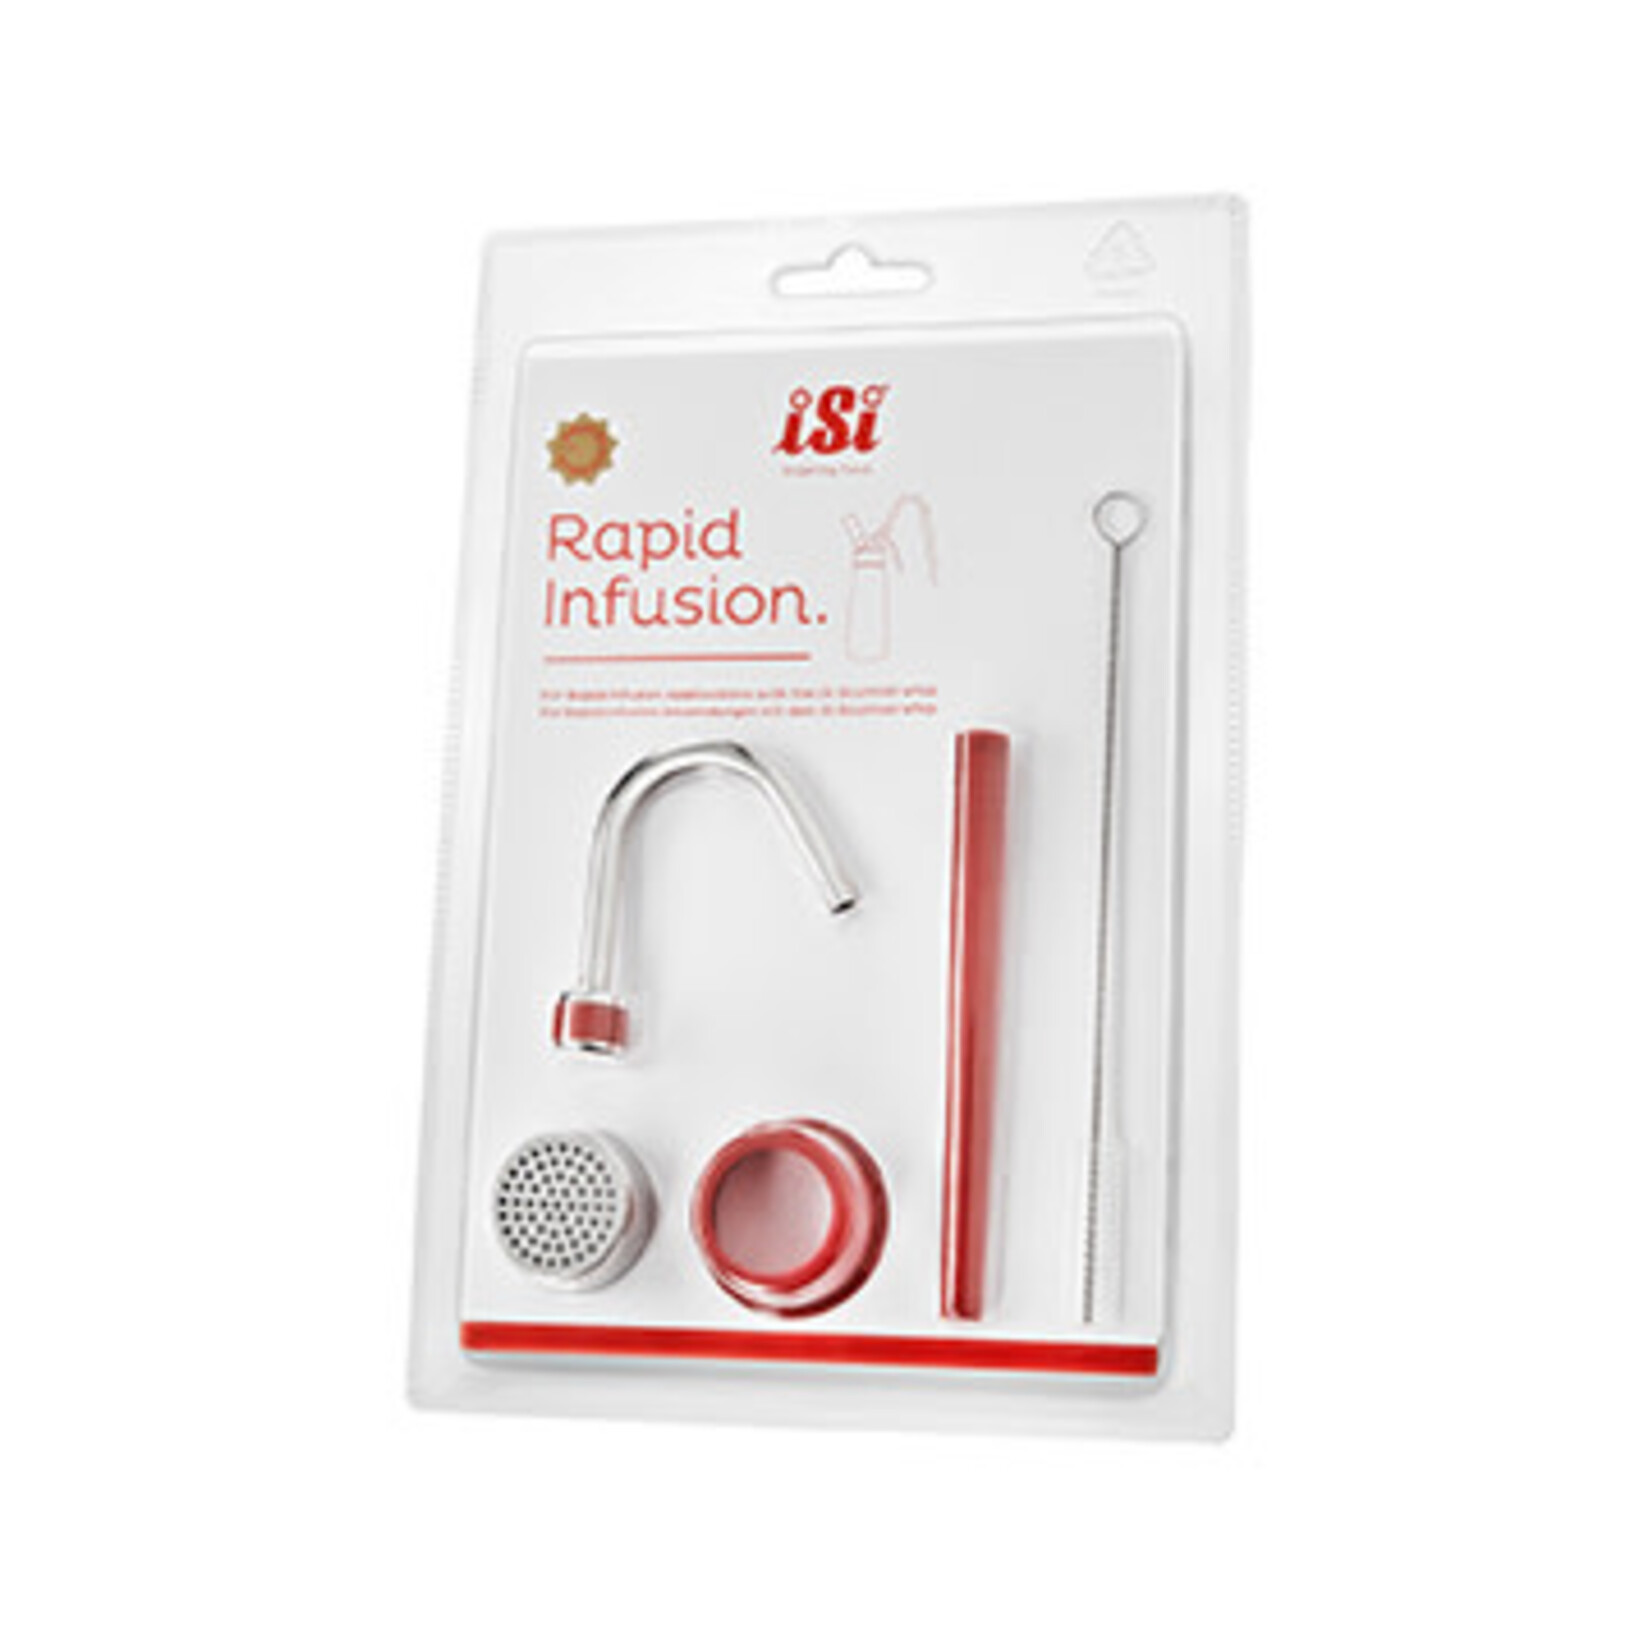 iSi Culinary Whip Rapid Infusion voor Gourmet Whip plus rvs iSi Rapid Infusion voor Culinaire iSi 2722